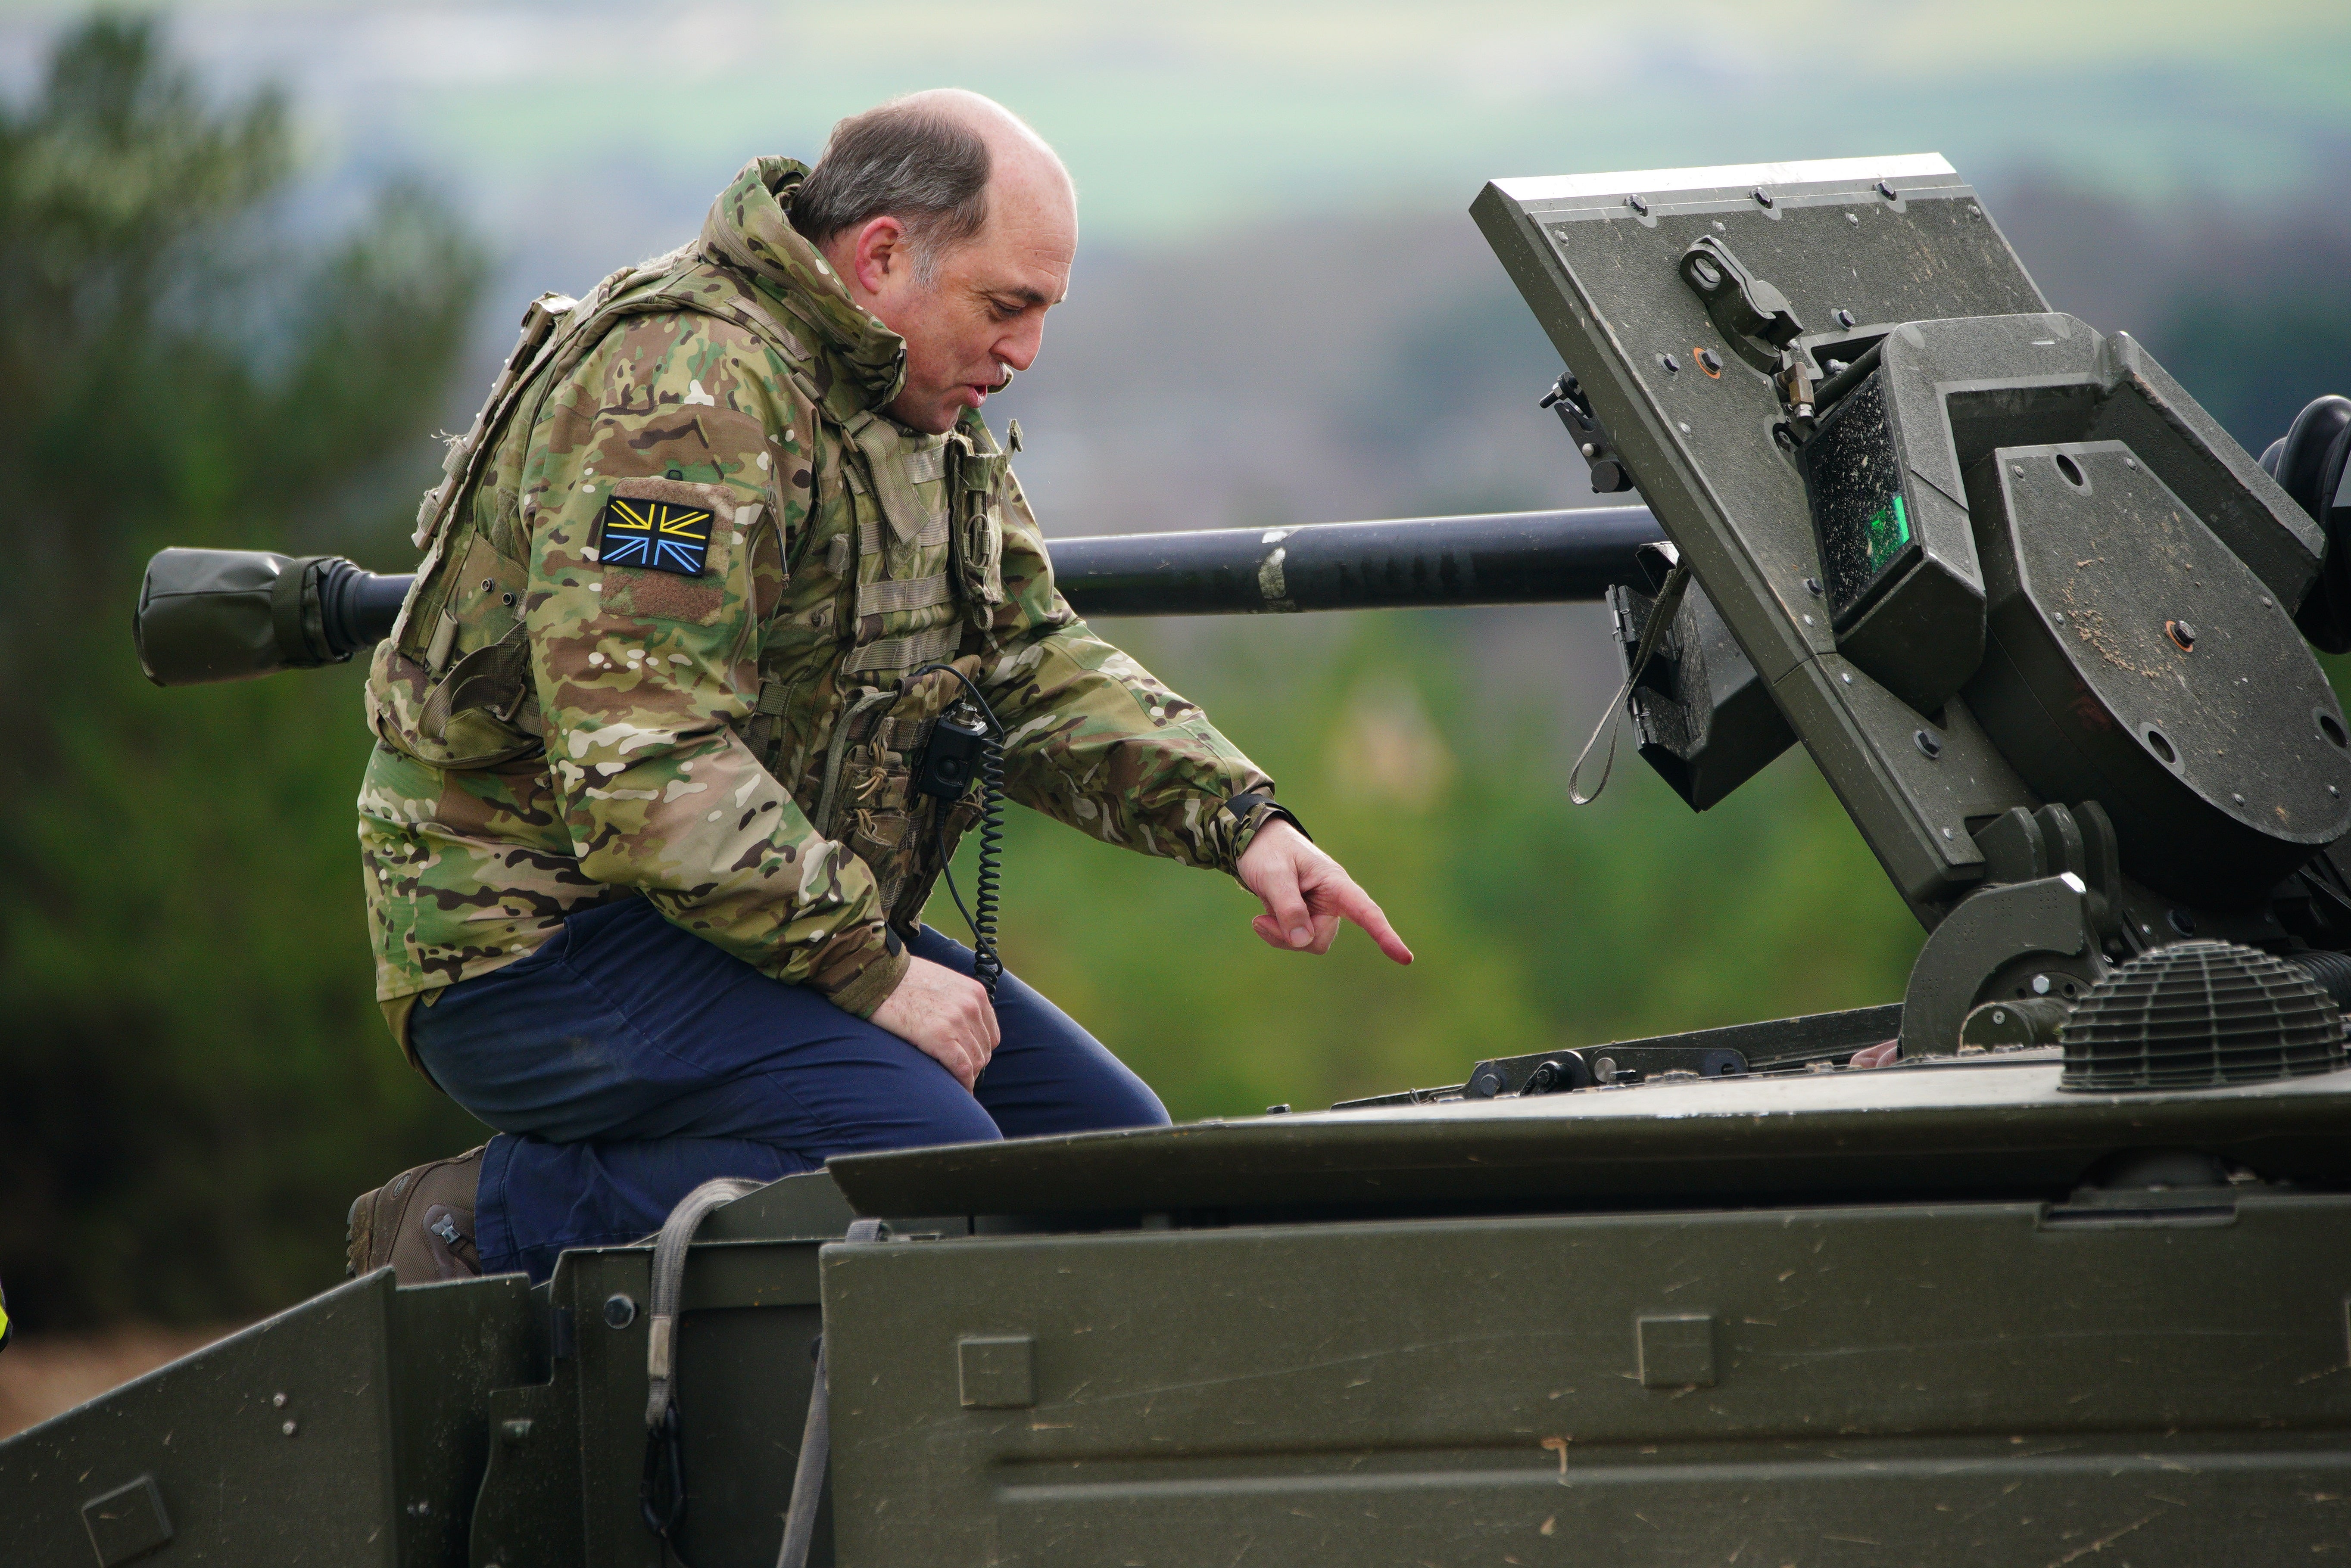 Defence Secretary Ben Wallace during a visit to Bovington Camp, a British Army military base in Dorset, to view Ukrainian soldiers training on Challenger 2 tanks